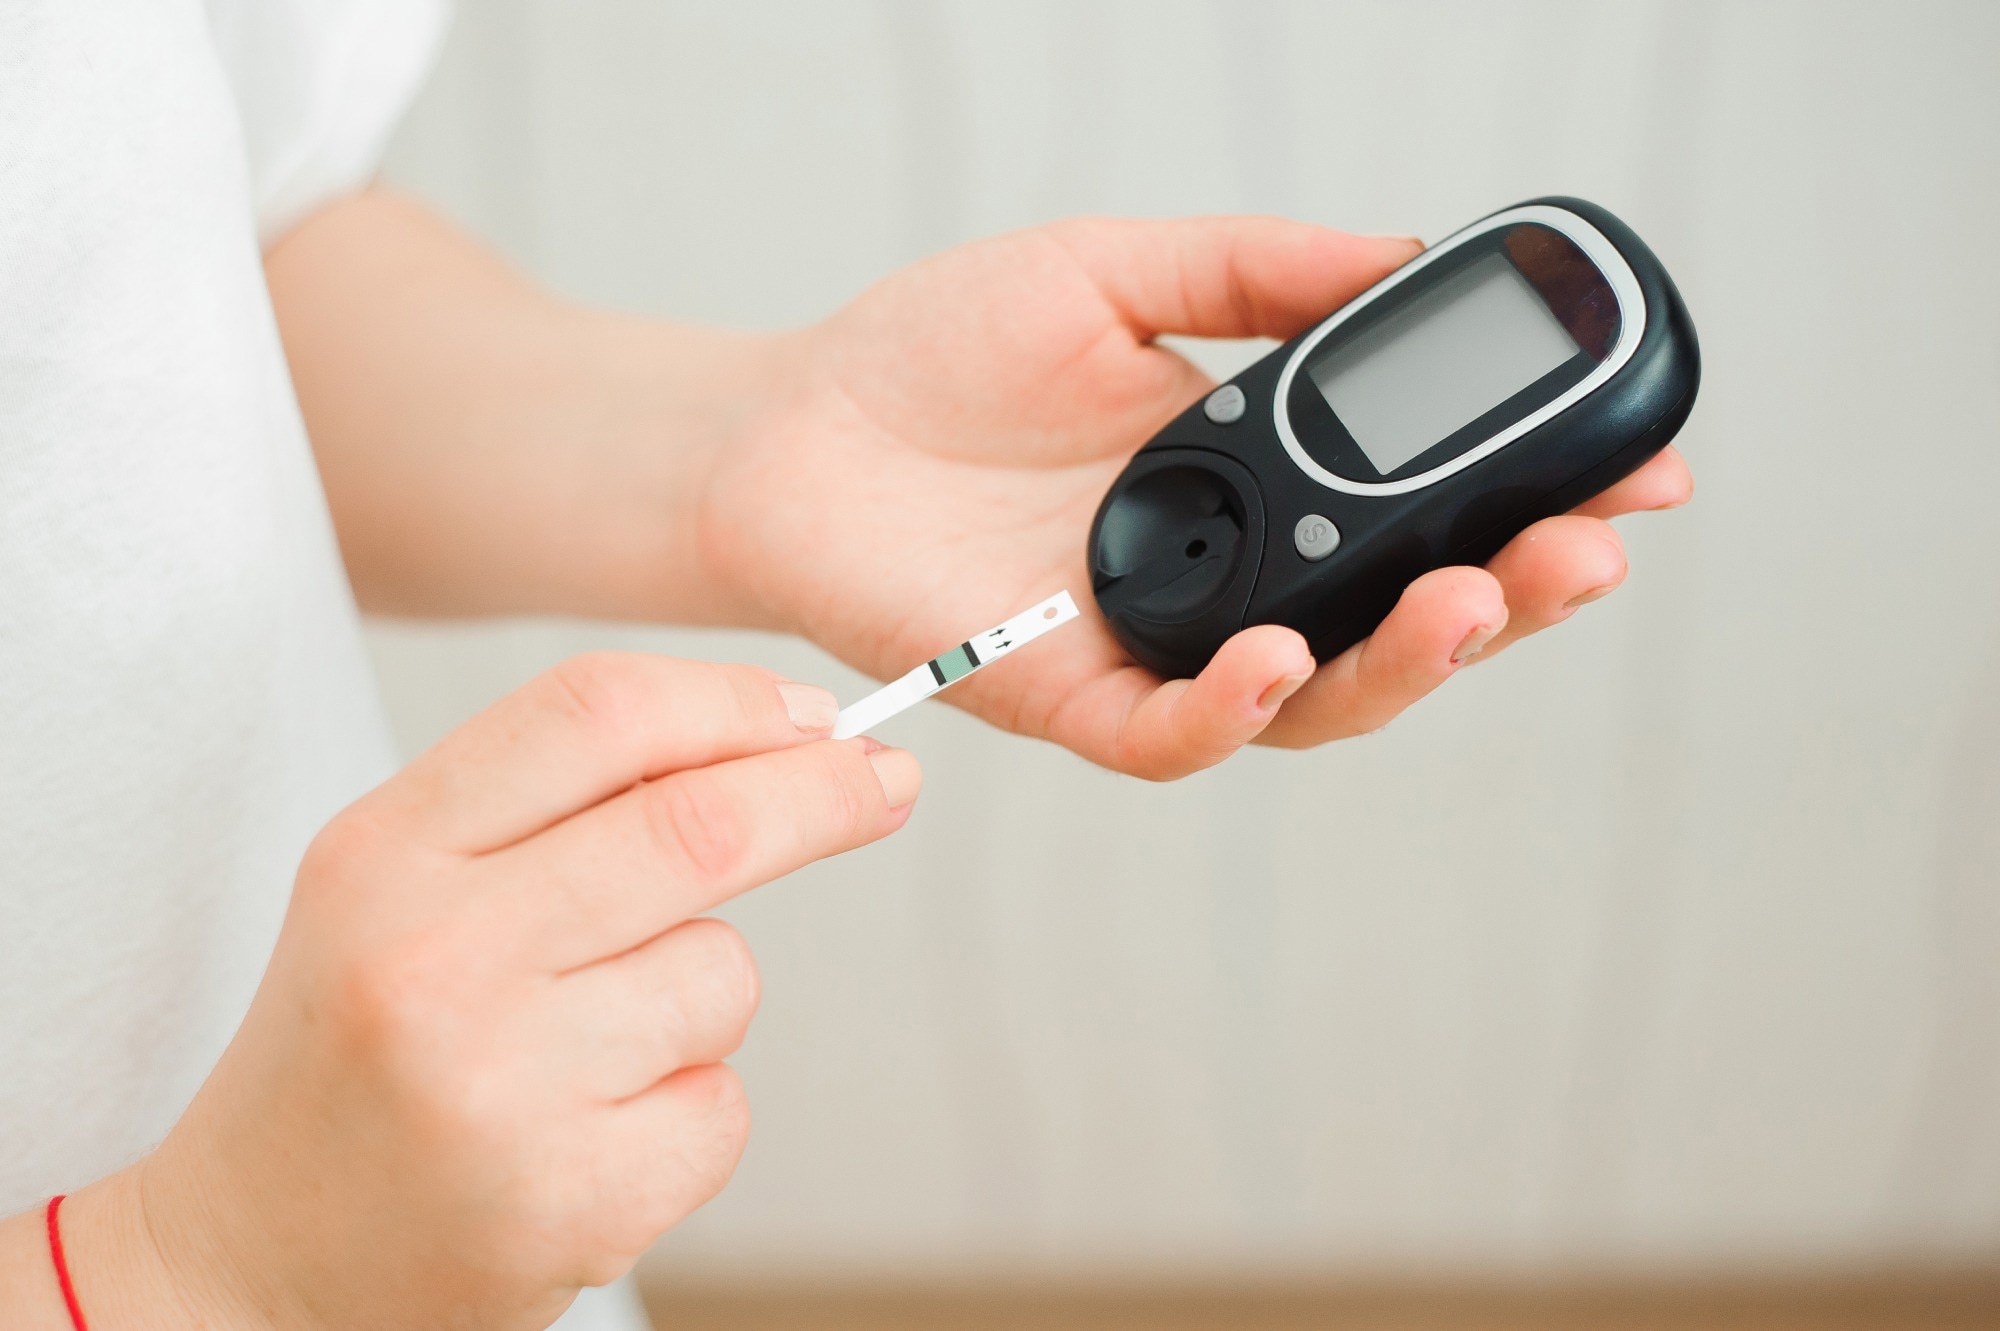 Study: Plasma protein biomarkers predict the development of persistent autoantibodies and type 1 diabetes 6 months prior to the onset of autoimmunity. Image Credit: OleksandrNagaiets/Shutterstock.com